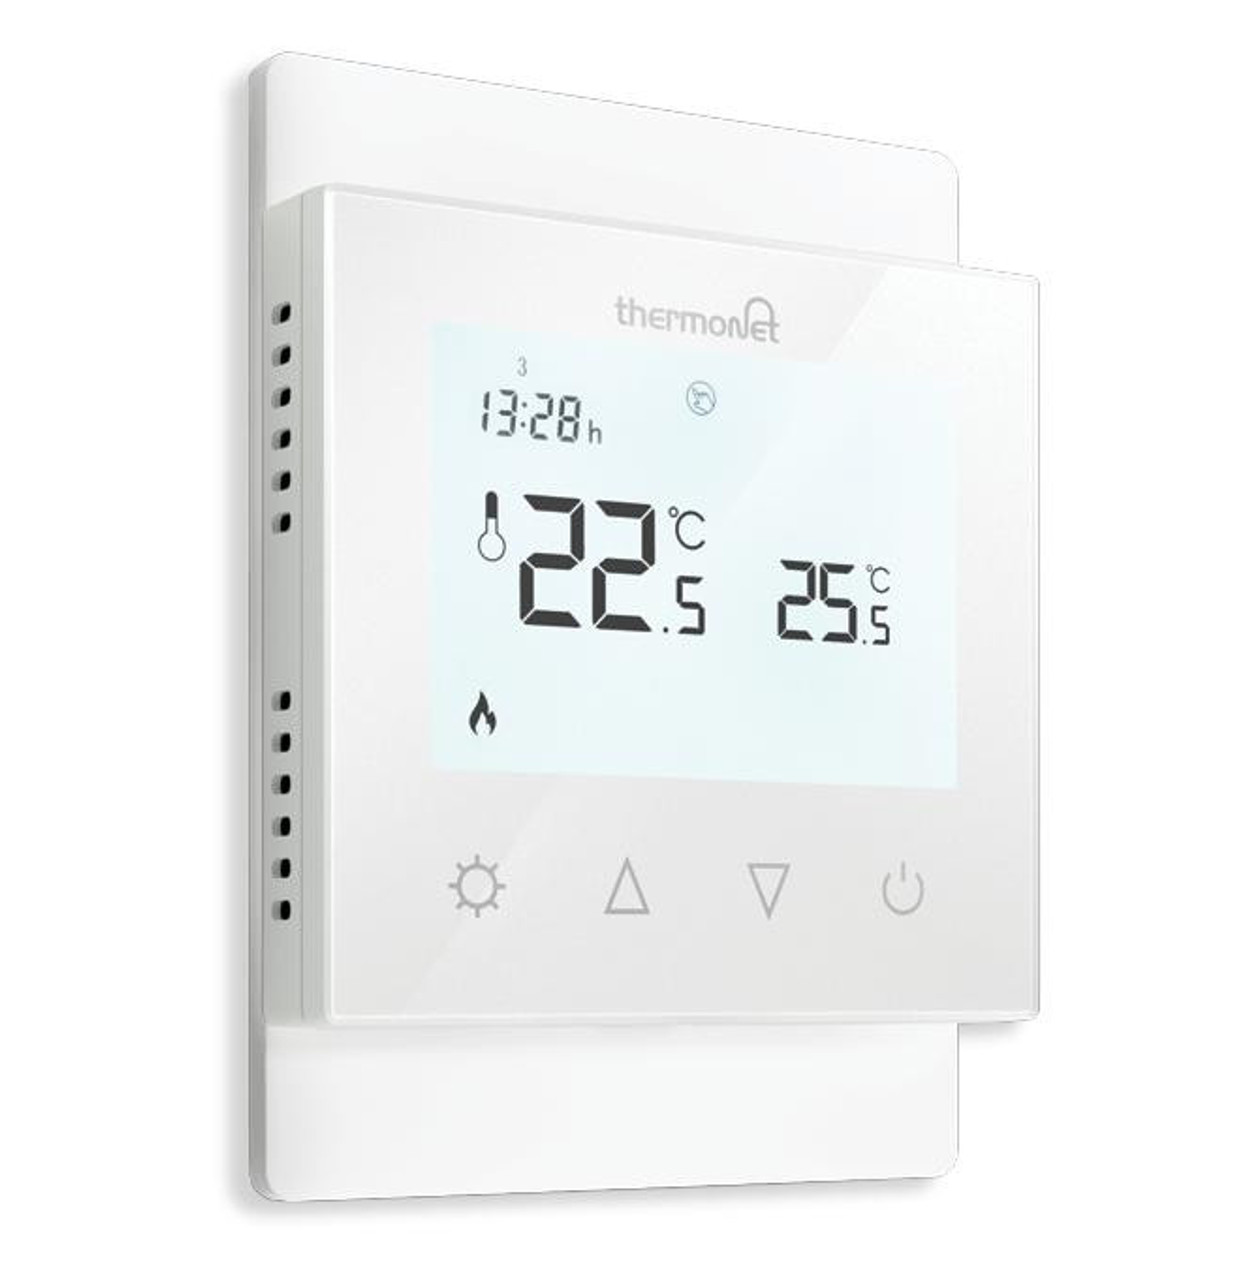 Thermonet EZ 150W/m² Underfloor Heating Kit 115014T with Programmable Thermostat 5220A 7m²